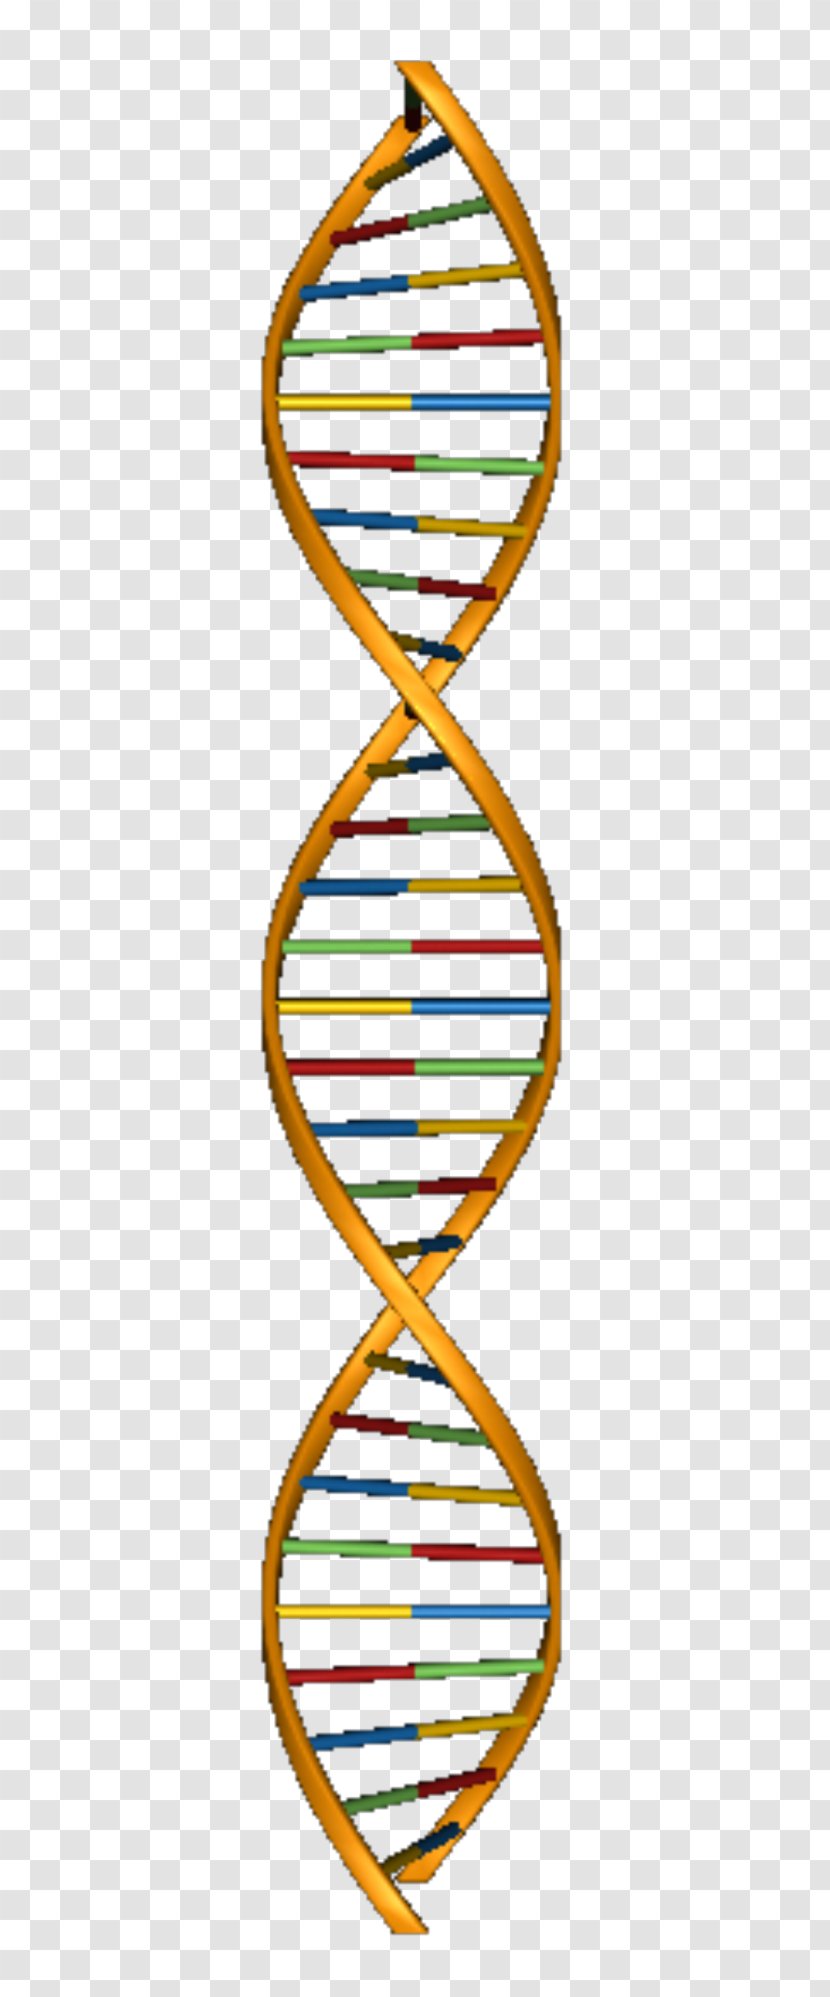 Molecular Models Of DNA Nucleic Acid Structure Double Helix Clip Art - Watercolor - Tree Transparent PNG